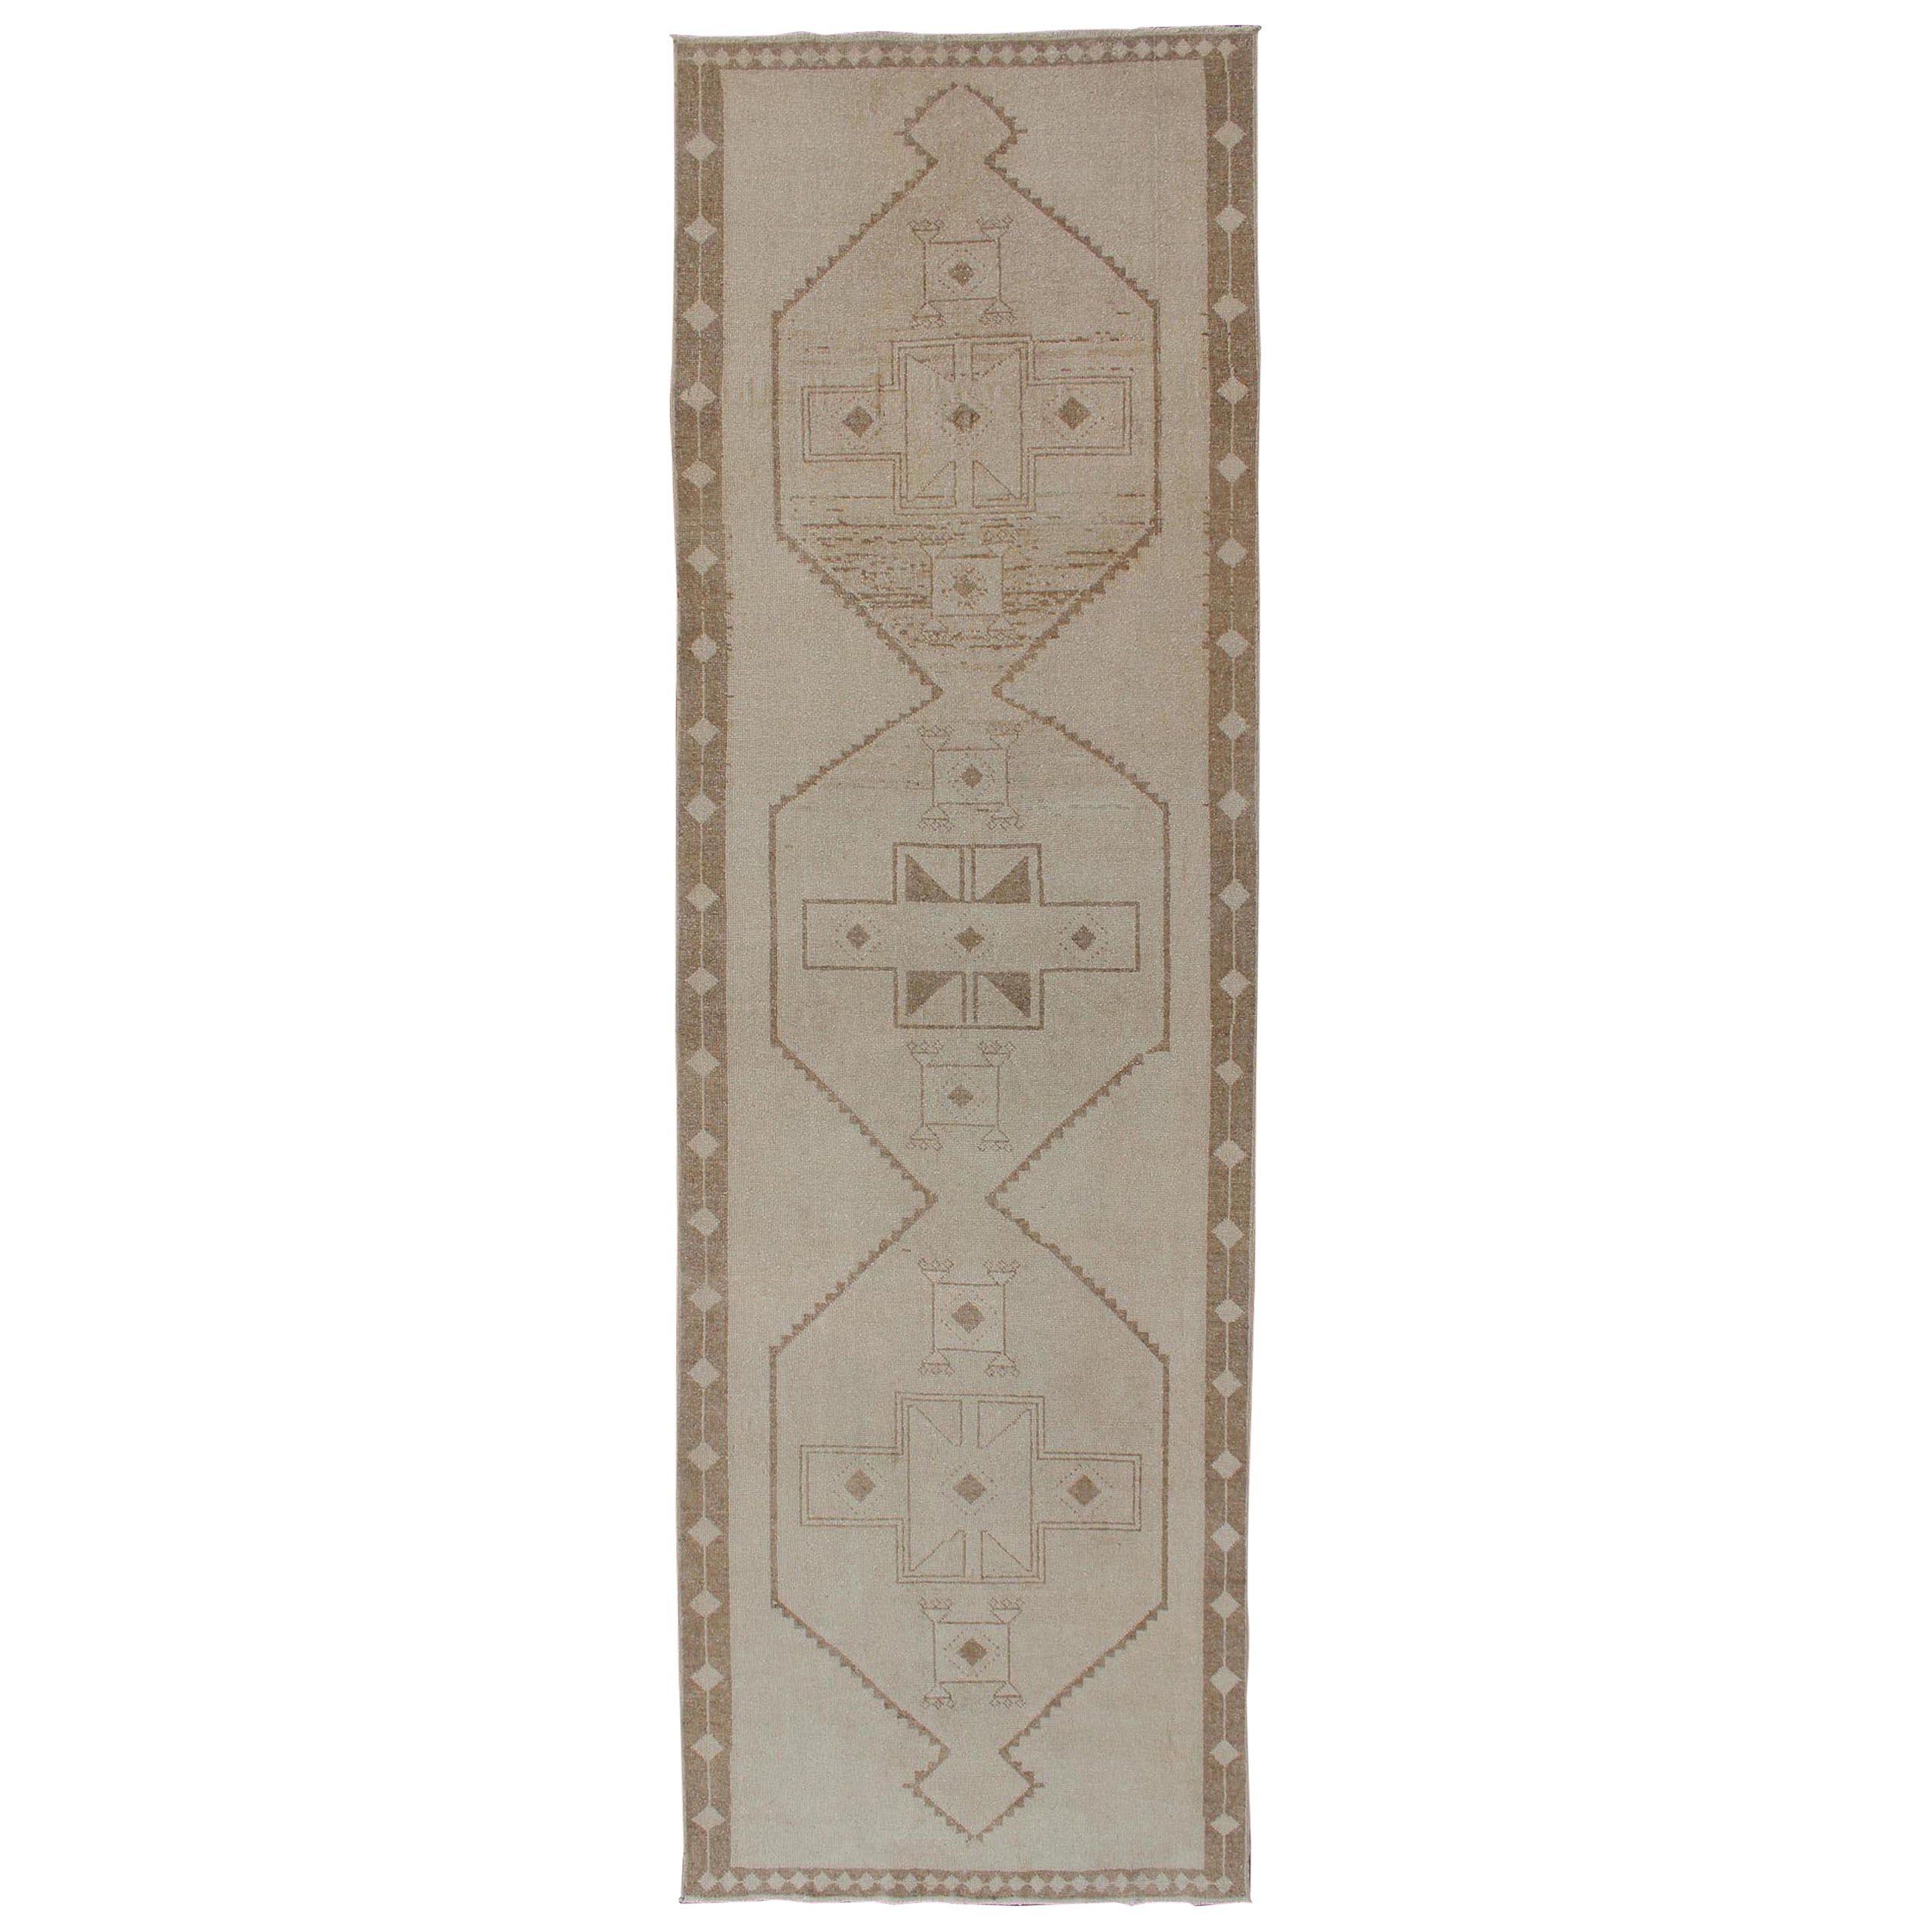 Vintage Oushak Turkish Runner with Geometric Medallions in Tan and Light Brown